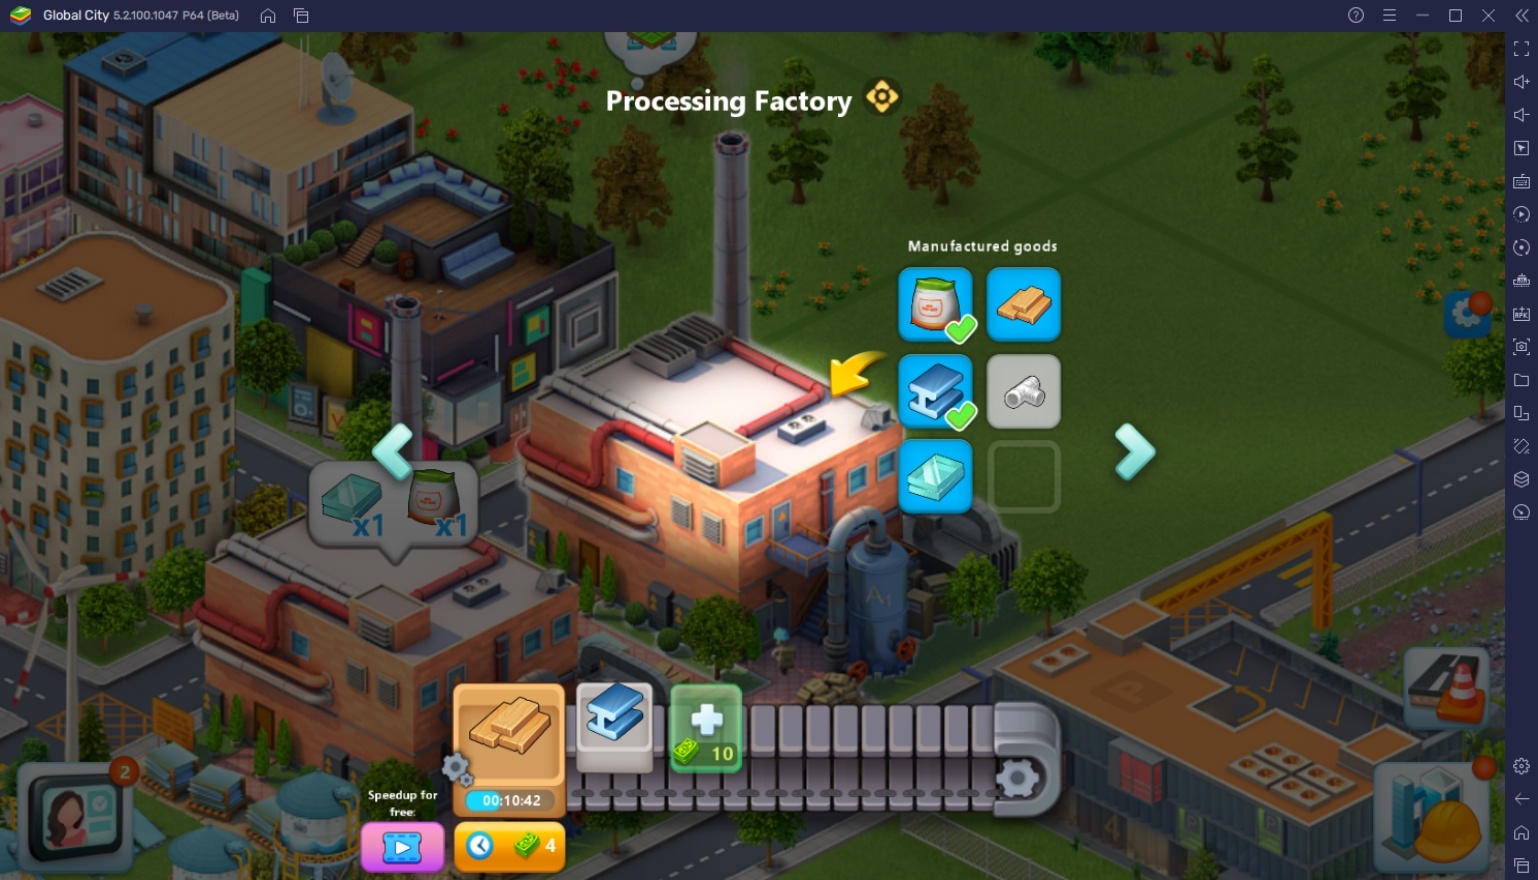 How to Build the Perfect Town in Global City: Build and Harvest